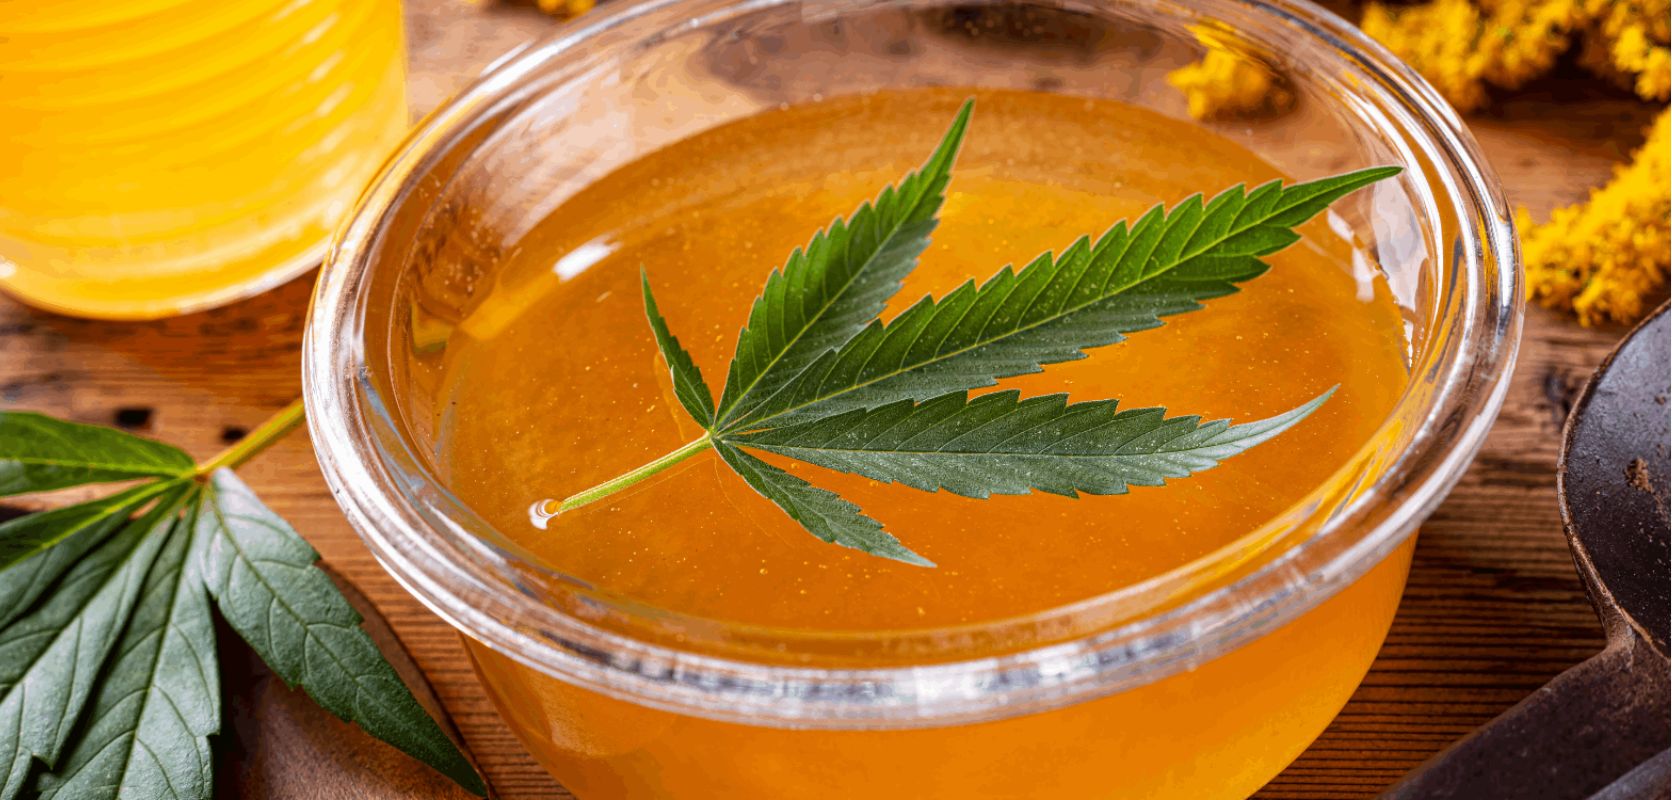 If you are shopping for THC honey oil in Canada, you may come across products that are infused with weed - these products do not refer to standard cannabis honey. 